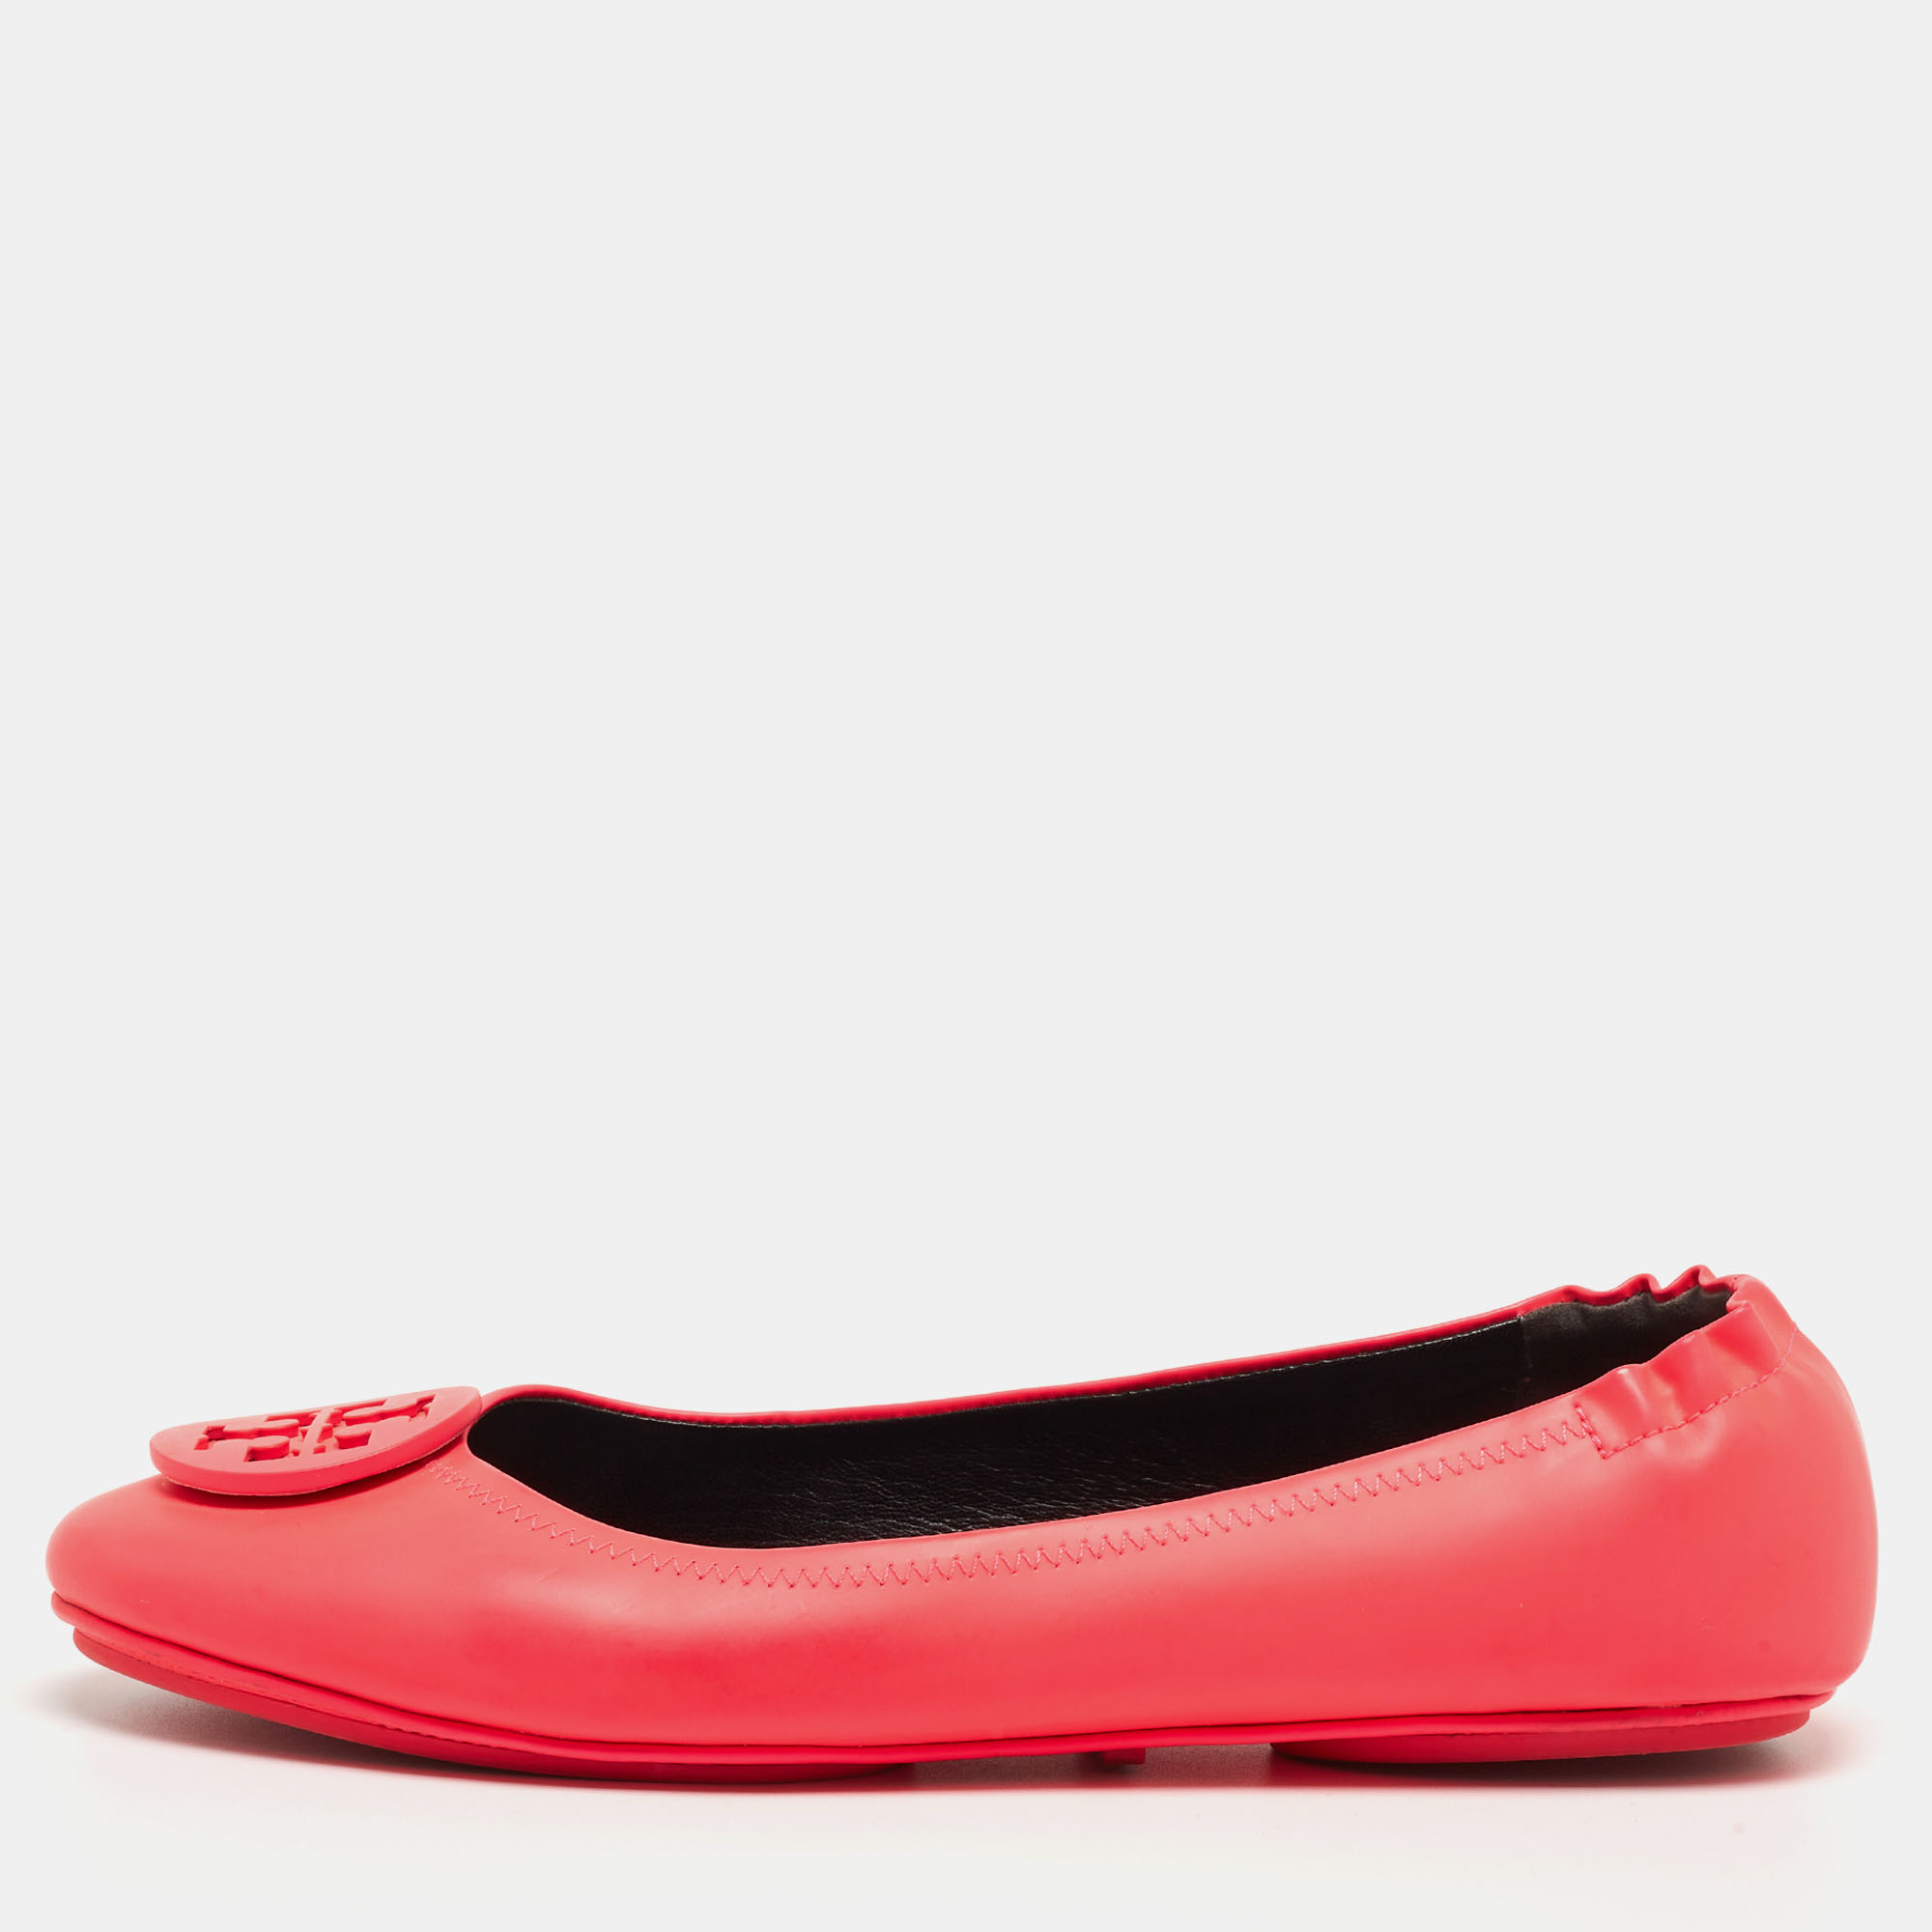 Pre-owned Tory Burch Neon Pink Leather Reva Ballet Flats Size 40.5